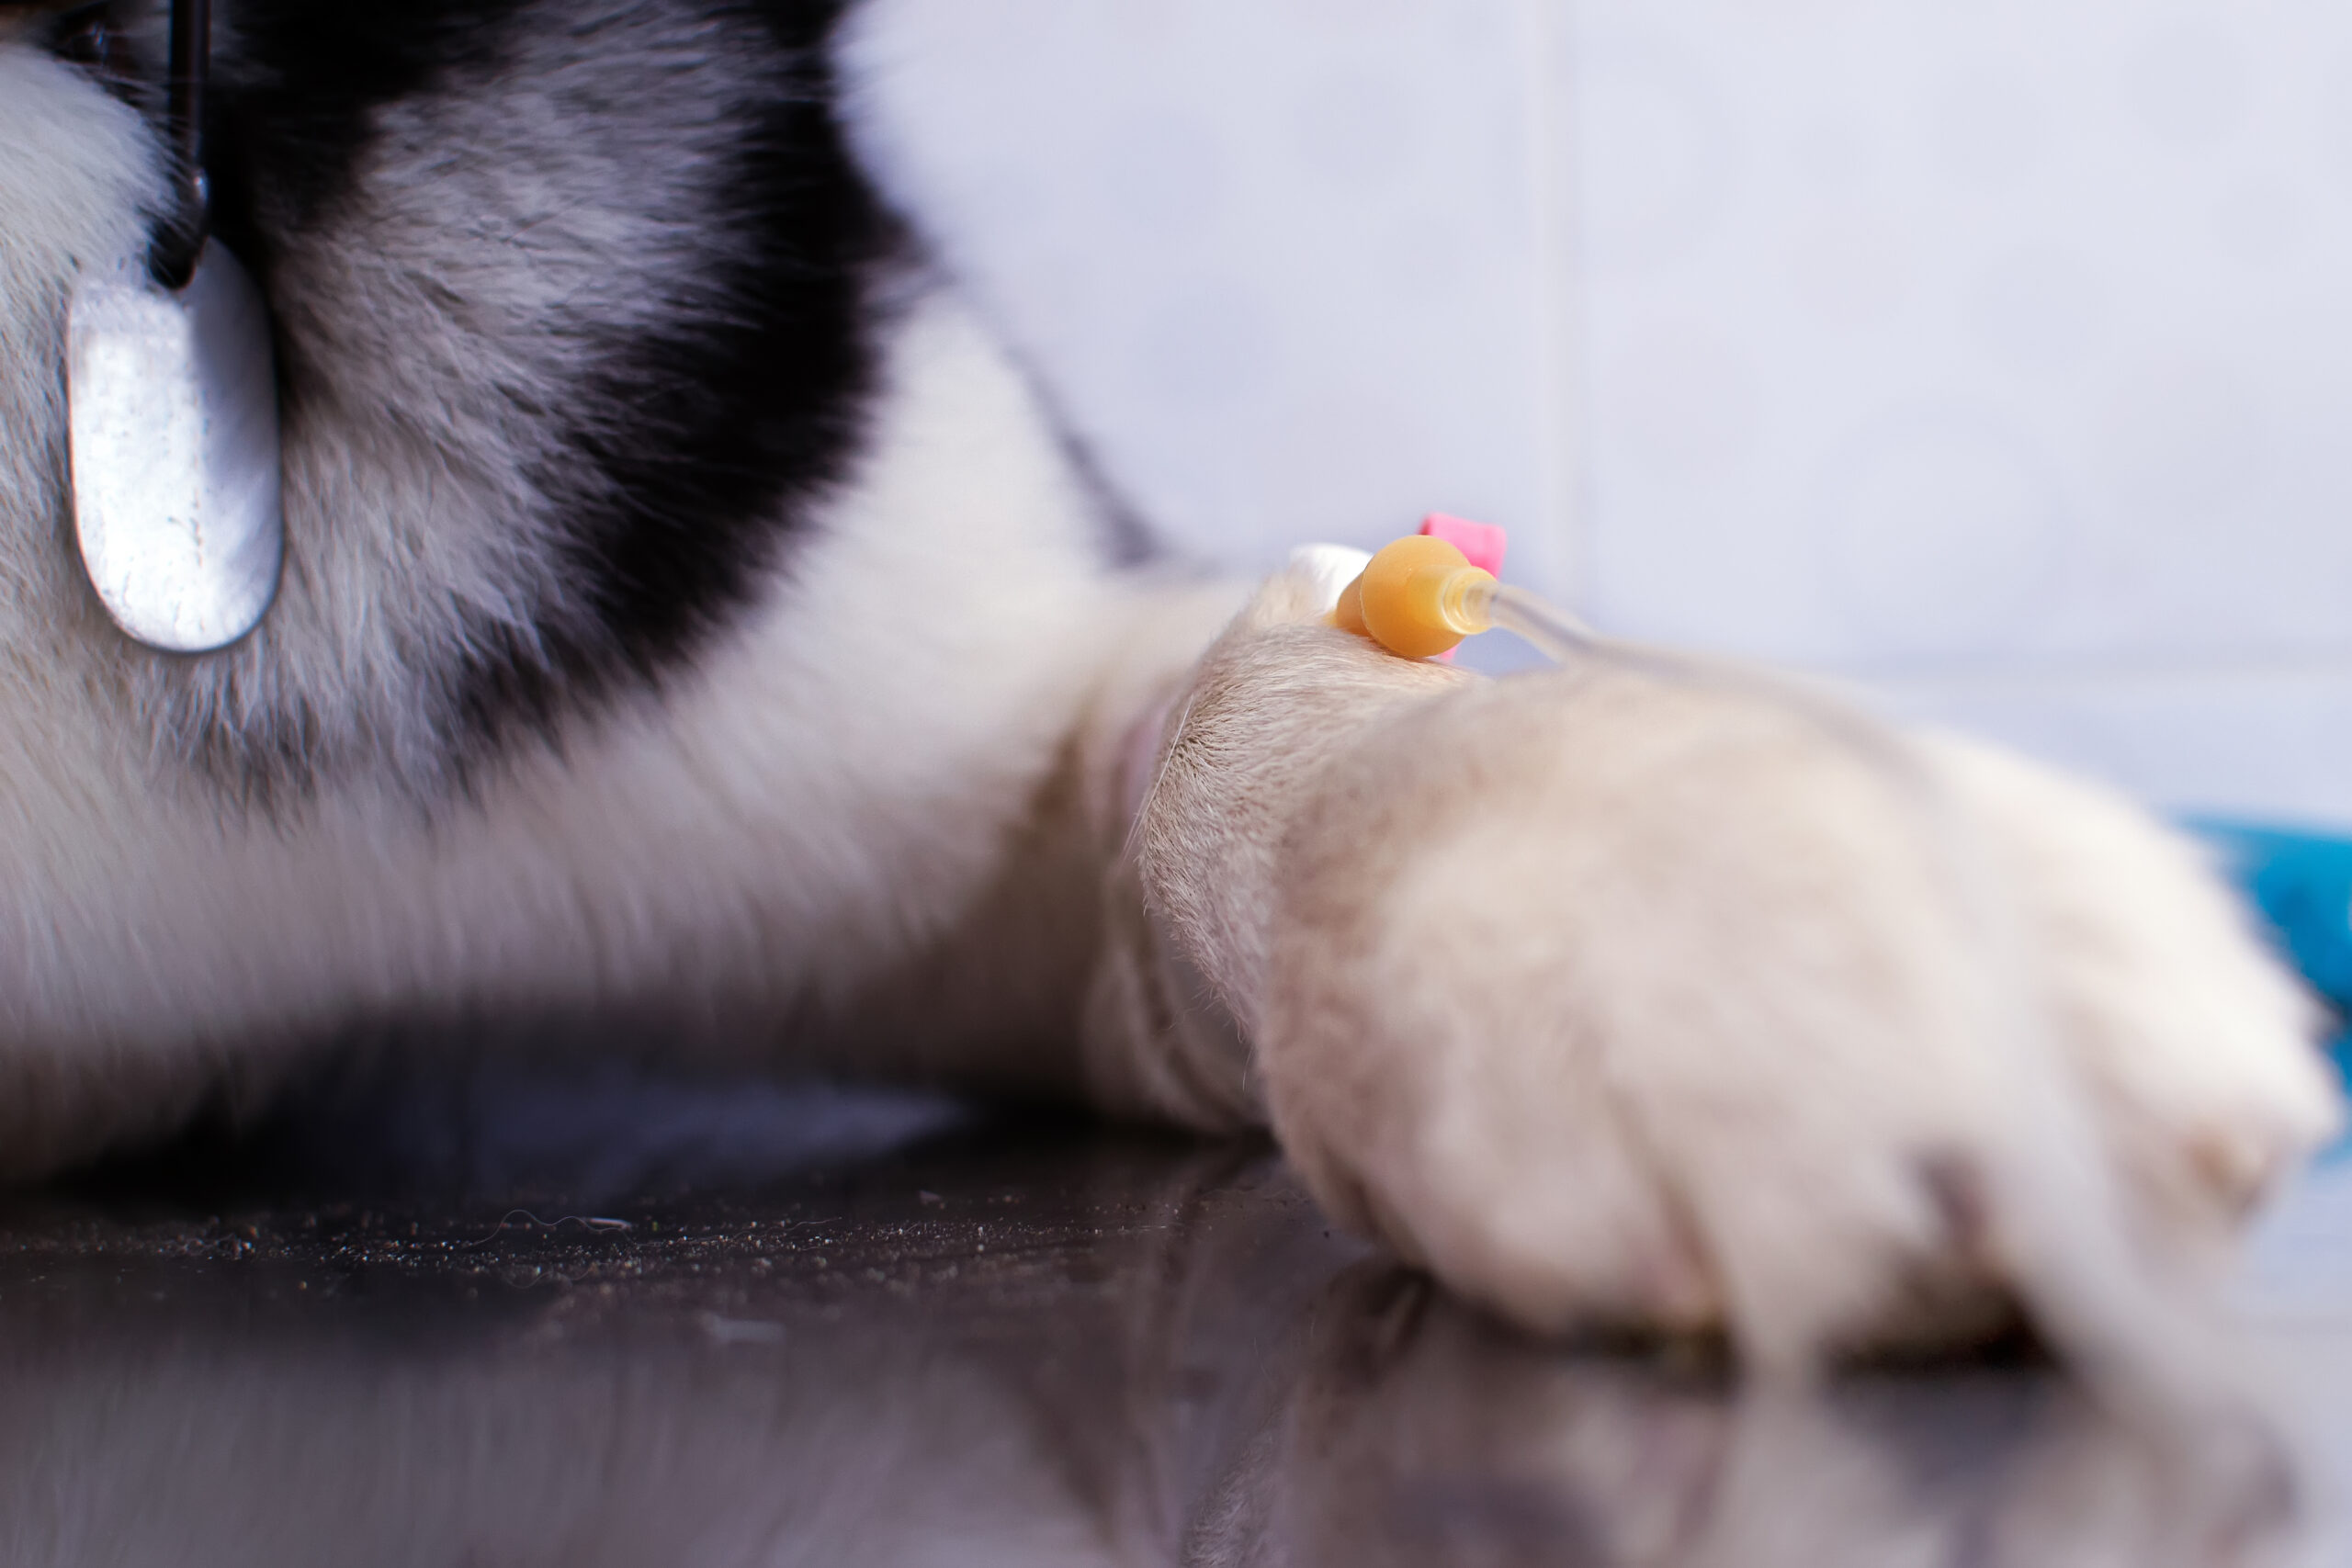 Cathetar inserted into the dog's paw